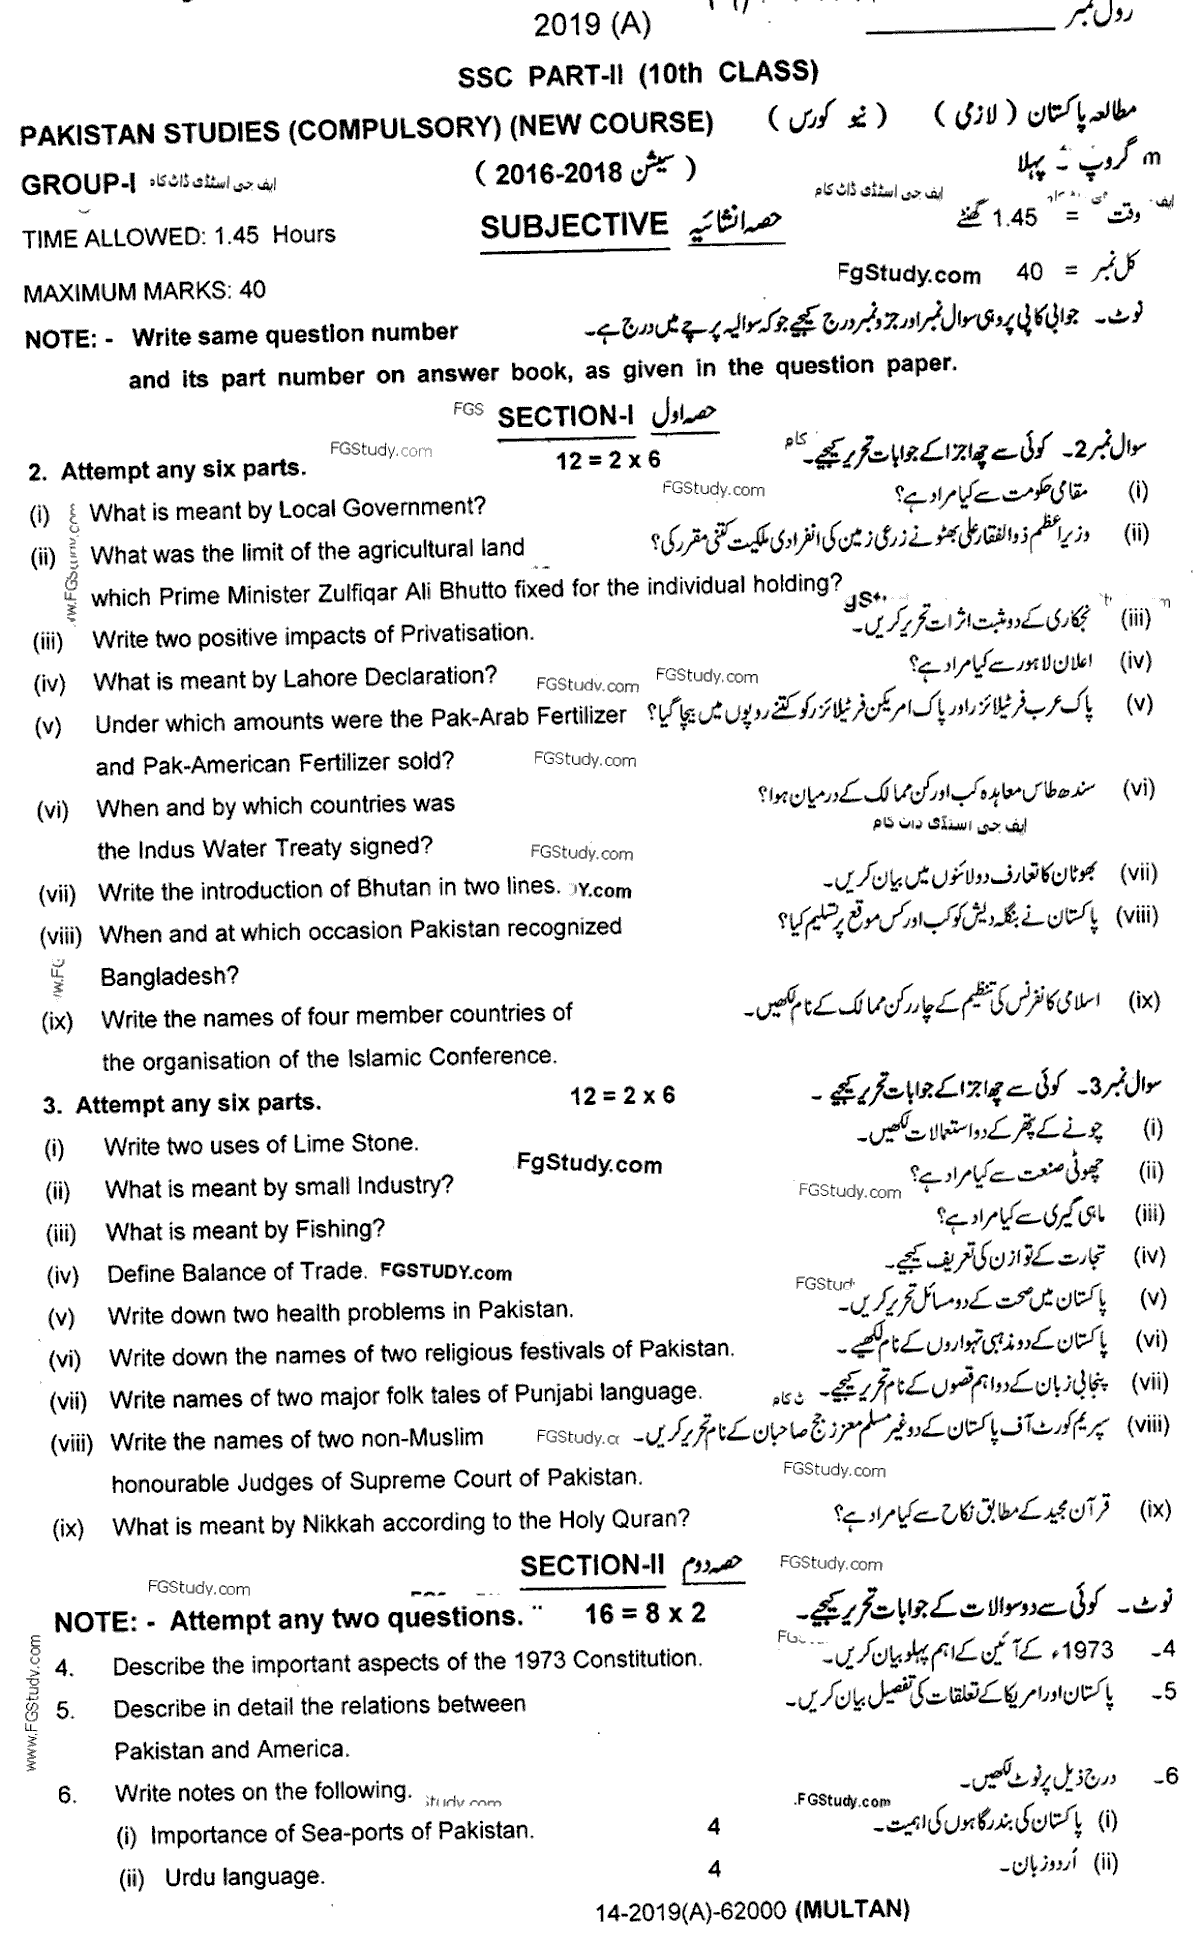 Pak Studies Group 1 Subjective 10th Class Past Papers 2019